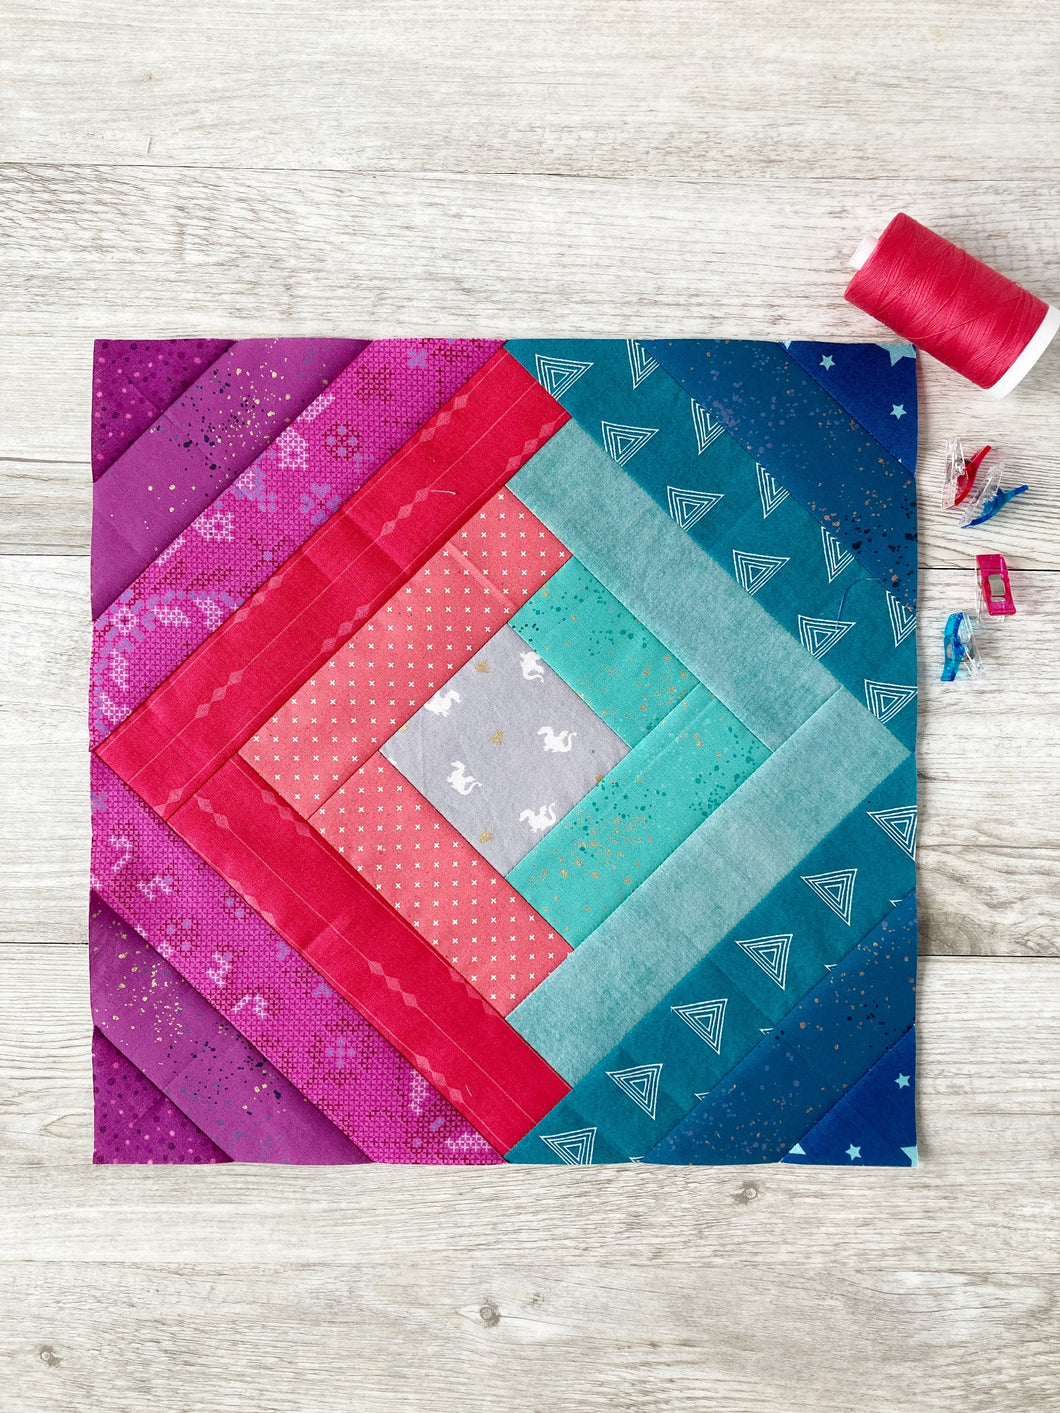 Twisted Log Cabin Quilt Block (traditional) - PDF Instant Download